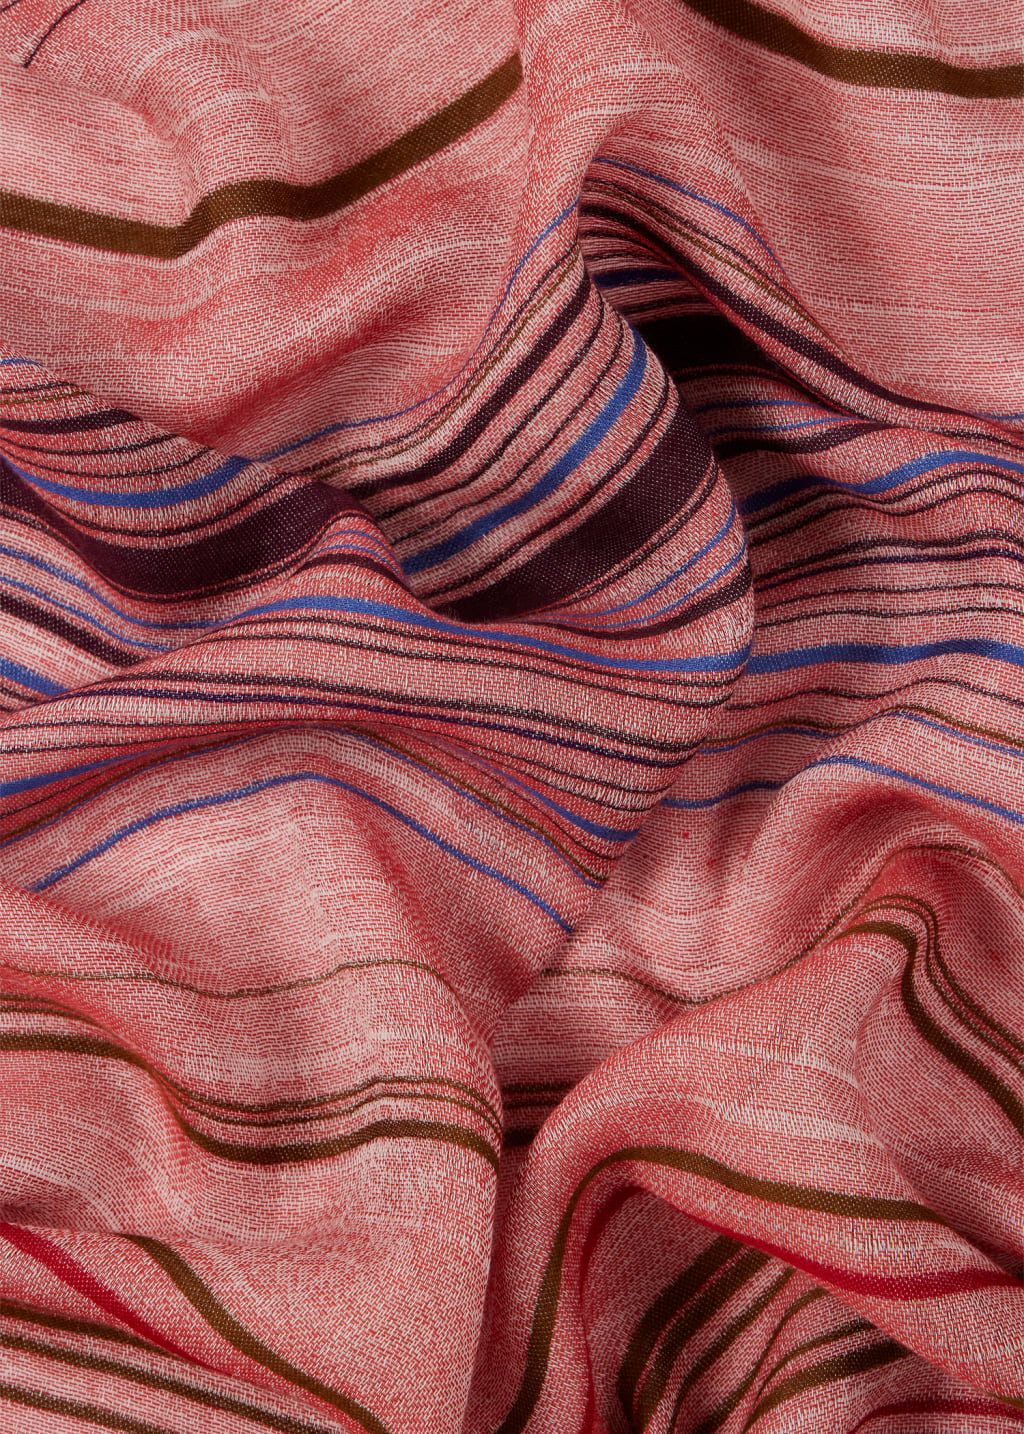 Detail View - Red Cotton-Blend Thin Stripe Scarf Paul Smith